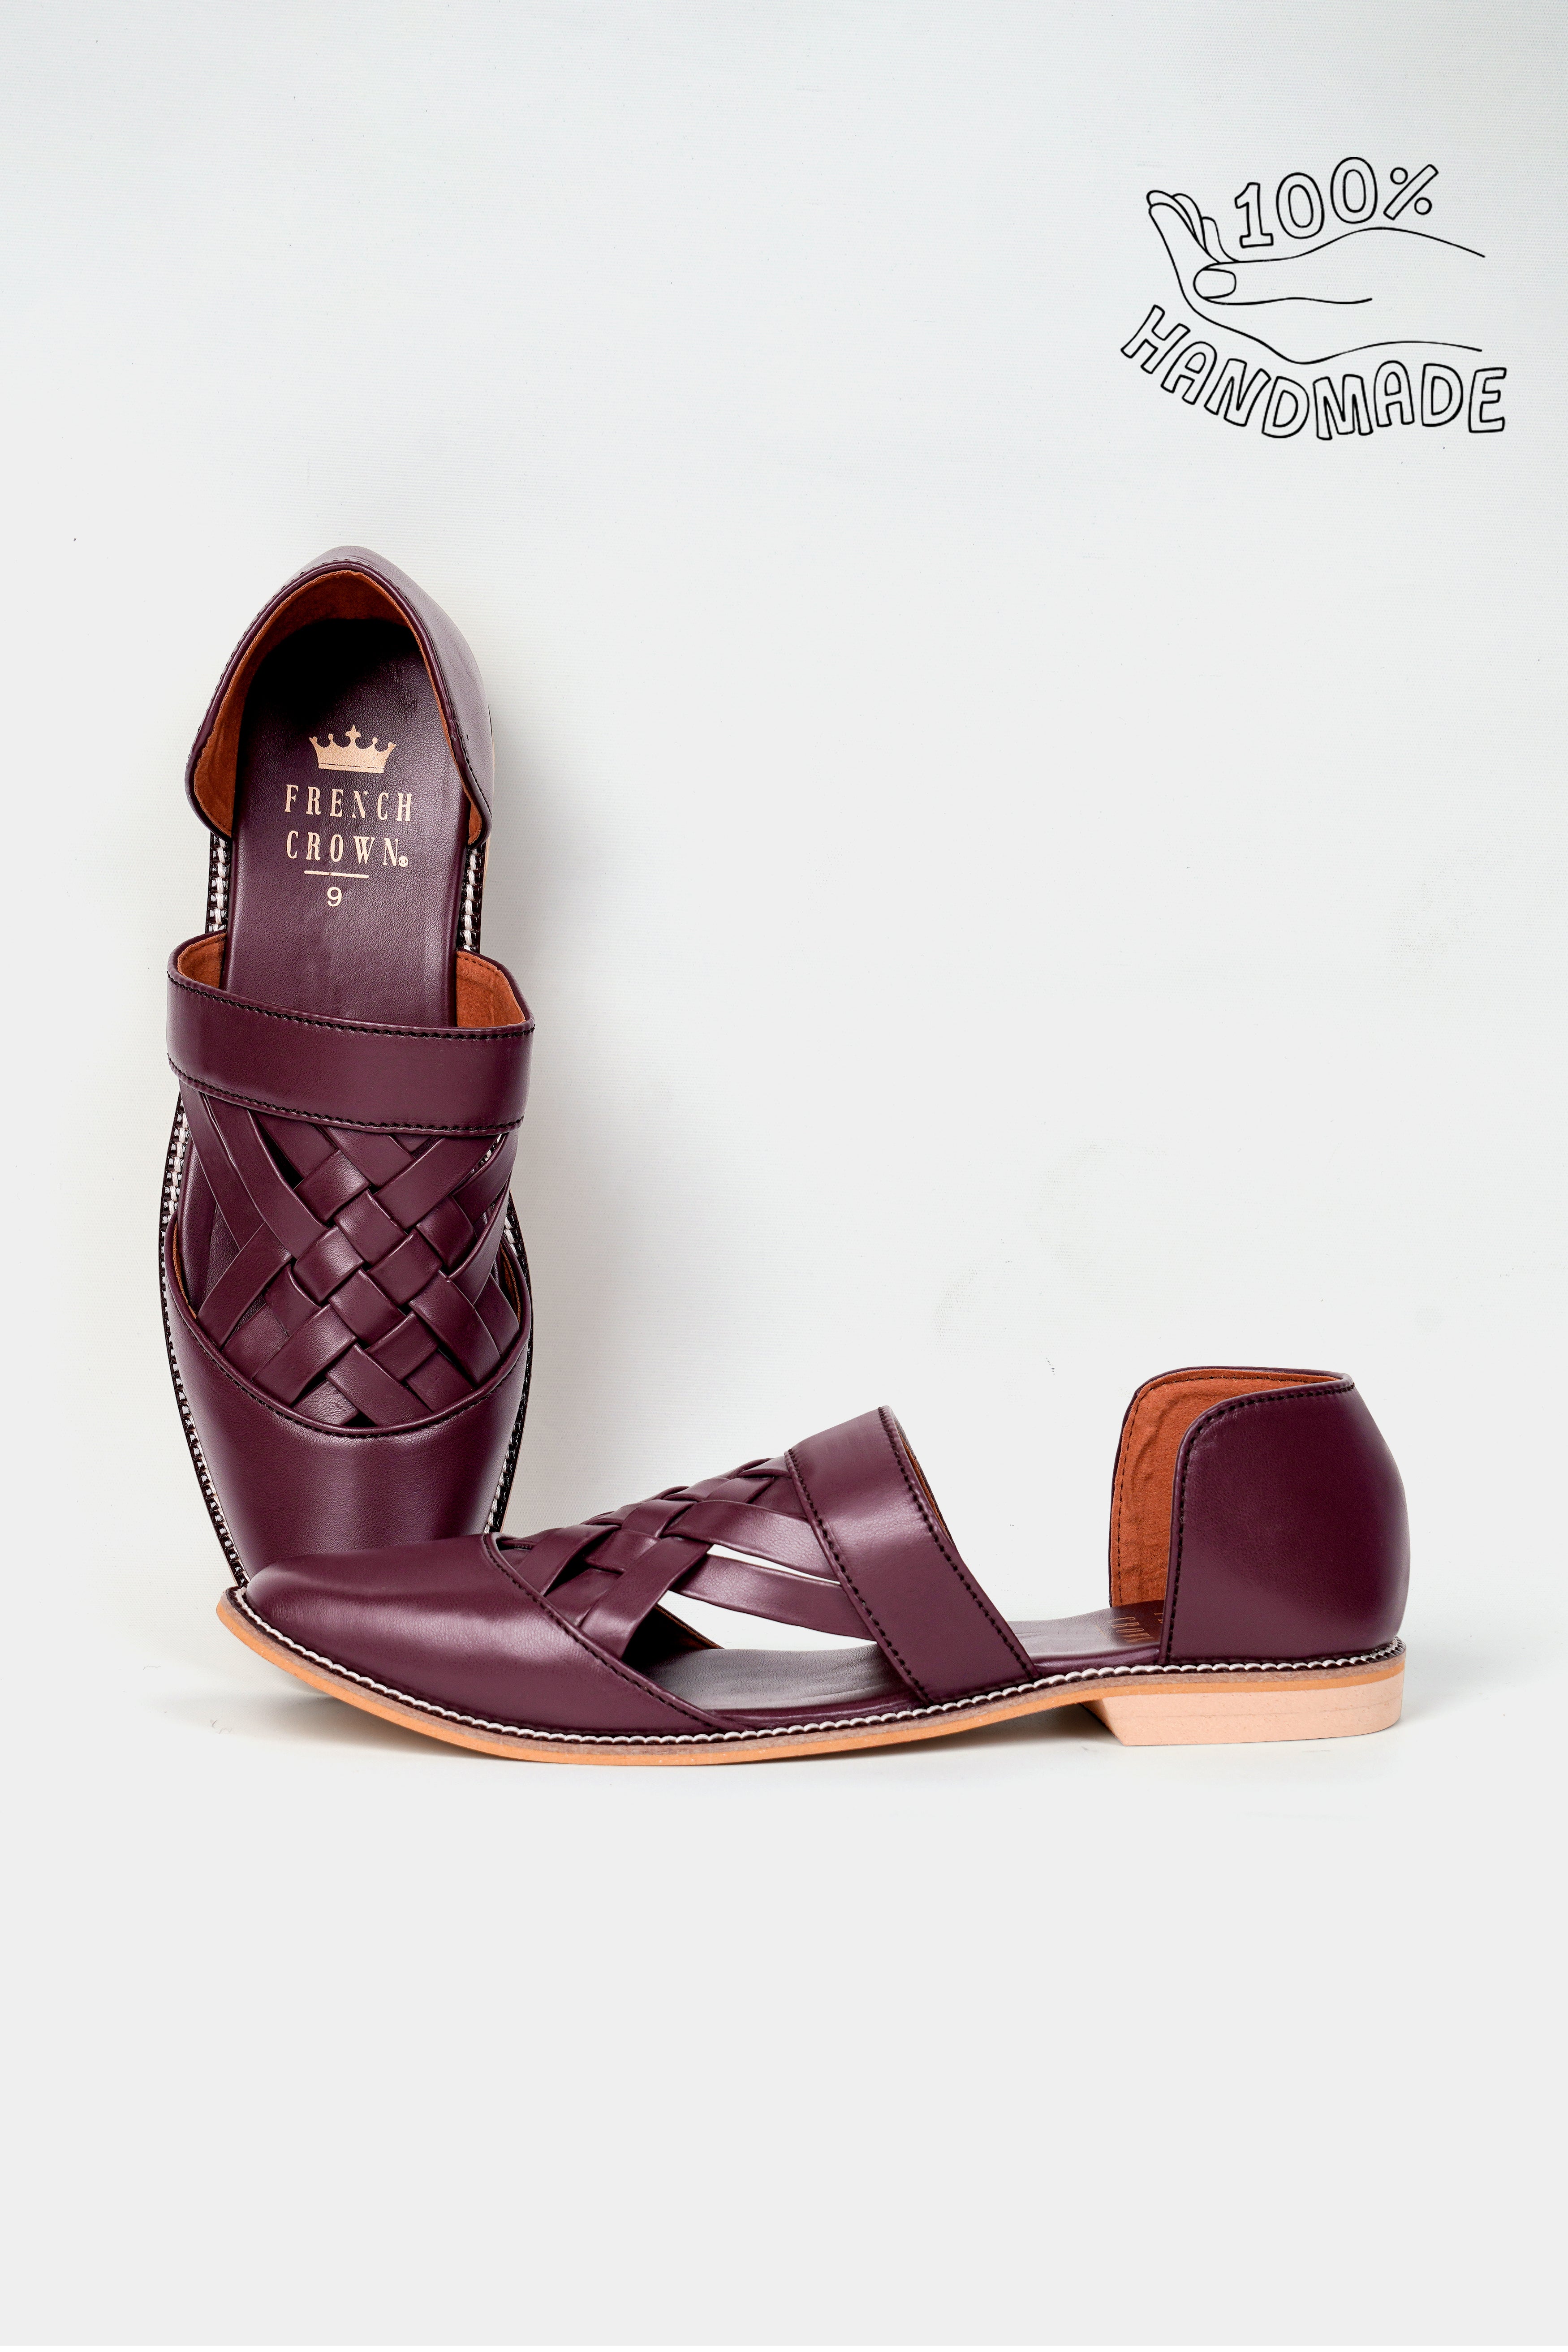 Wine Criss Cross Vegan Leather Hand Stitched Pathanis Sandal FT123-6, FT123-7, FT123-8, FT123-9, FT123-10, FT123-11